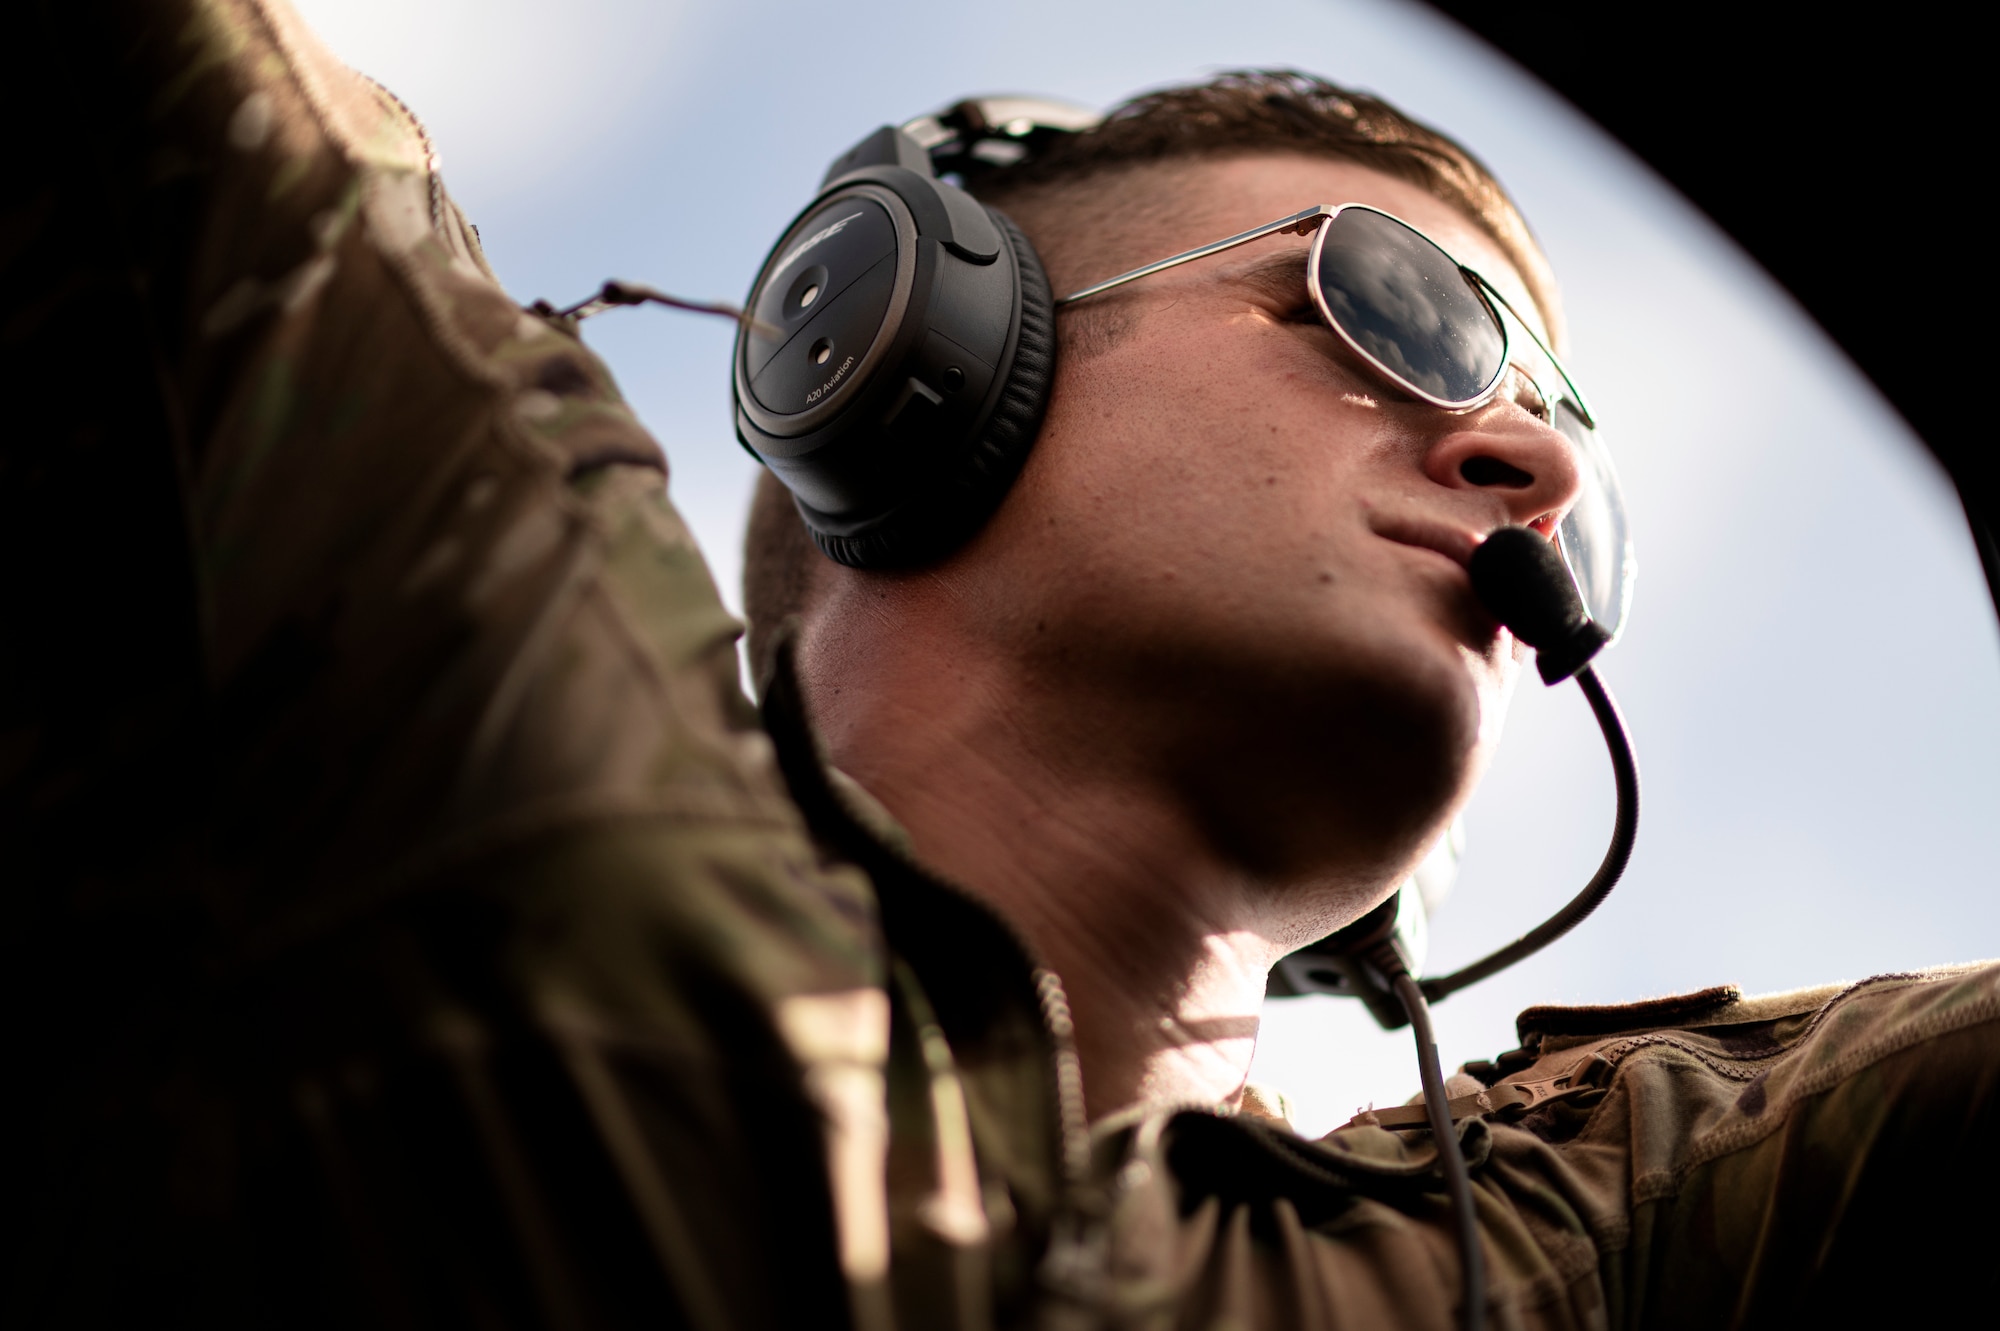 U.S. Air Force Capt. Ben Singer, 71st Rescue Squadron HC-130J pilot, waits for aircrew to finish pre-flight tasks before departing Moody Air Force Base, Georgia, aboard an HC-130J Combat King II aircraft, Aug. 29, 2021. The 71st RQS provided airlift for the 822nd Base Defense Squadron’s deployment. The 822nd BDS were tasked to provide an enhanced security presence at Holloman Air Force Base, New Mexico, in support of Task Force – Holloman. The Department of Defense, through U.S. Northern Command, and in support of the Department of Homeland Security, is providing transportation, temporary housing, medical screening, and general support for at least 50,000 Afghan evacuees at suitable facilities, in permanent or temporary structures, as quickly as possible. This initiative provides Afghan personnel essential support at secure locations outside Afghanistan. (U.S. Air Force photo by Staff Sgt. Devin Boyer)